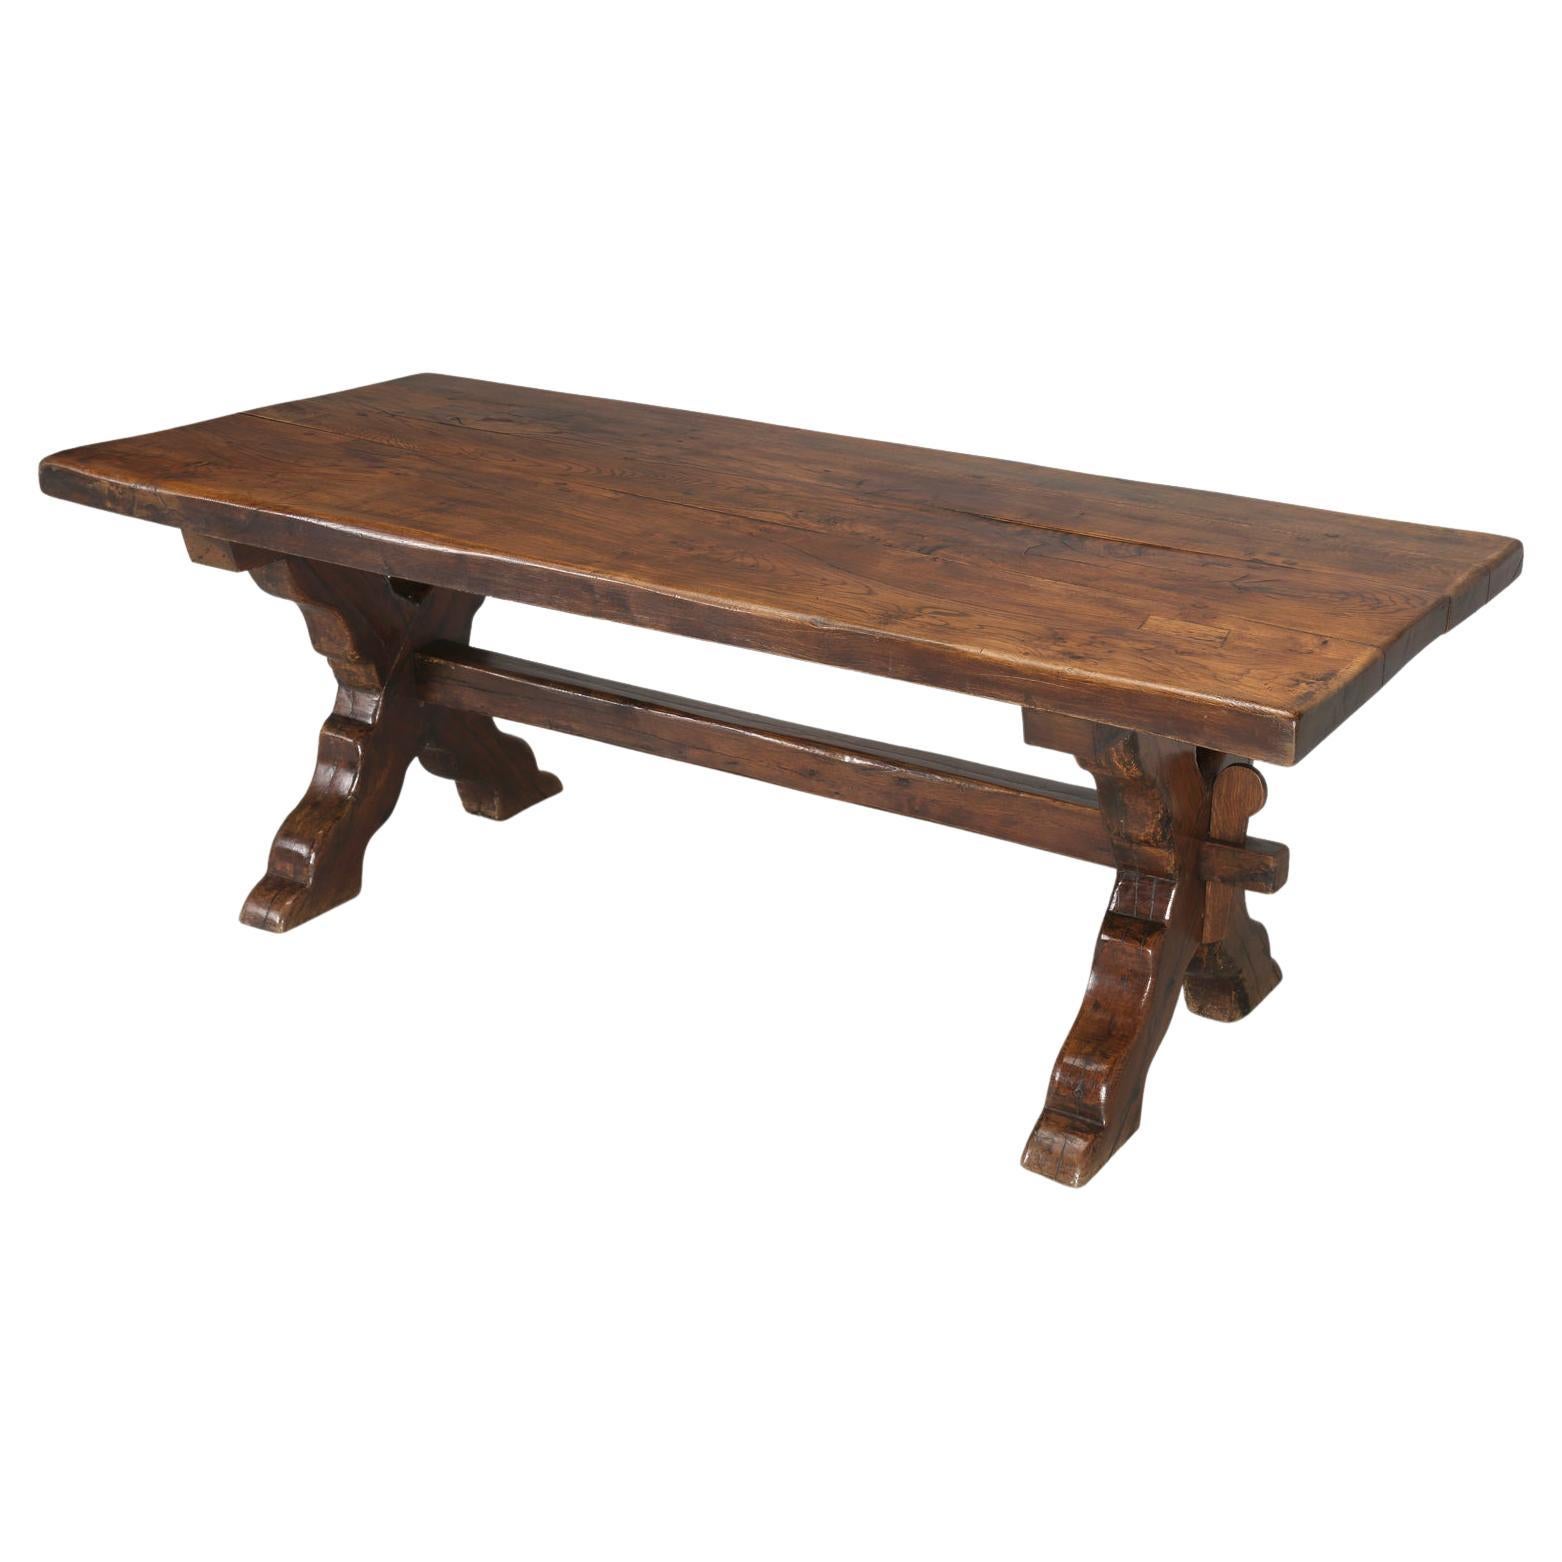 Antique French Oak Trestle Farm or Dining Table Restored, Circa Late 1800's